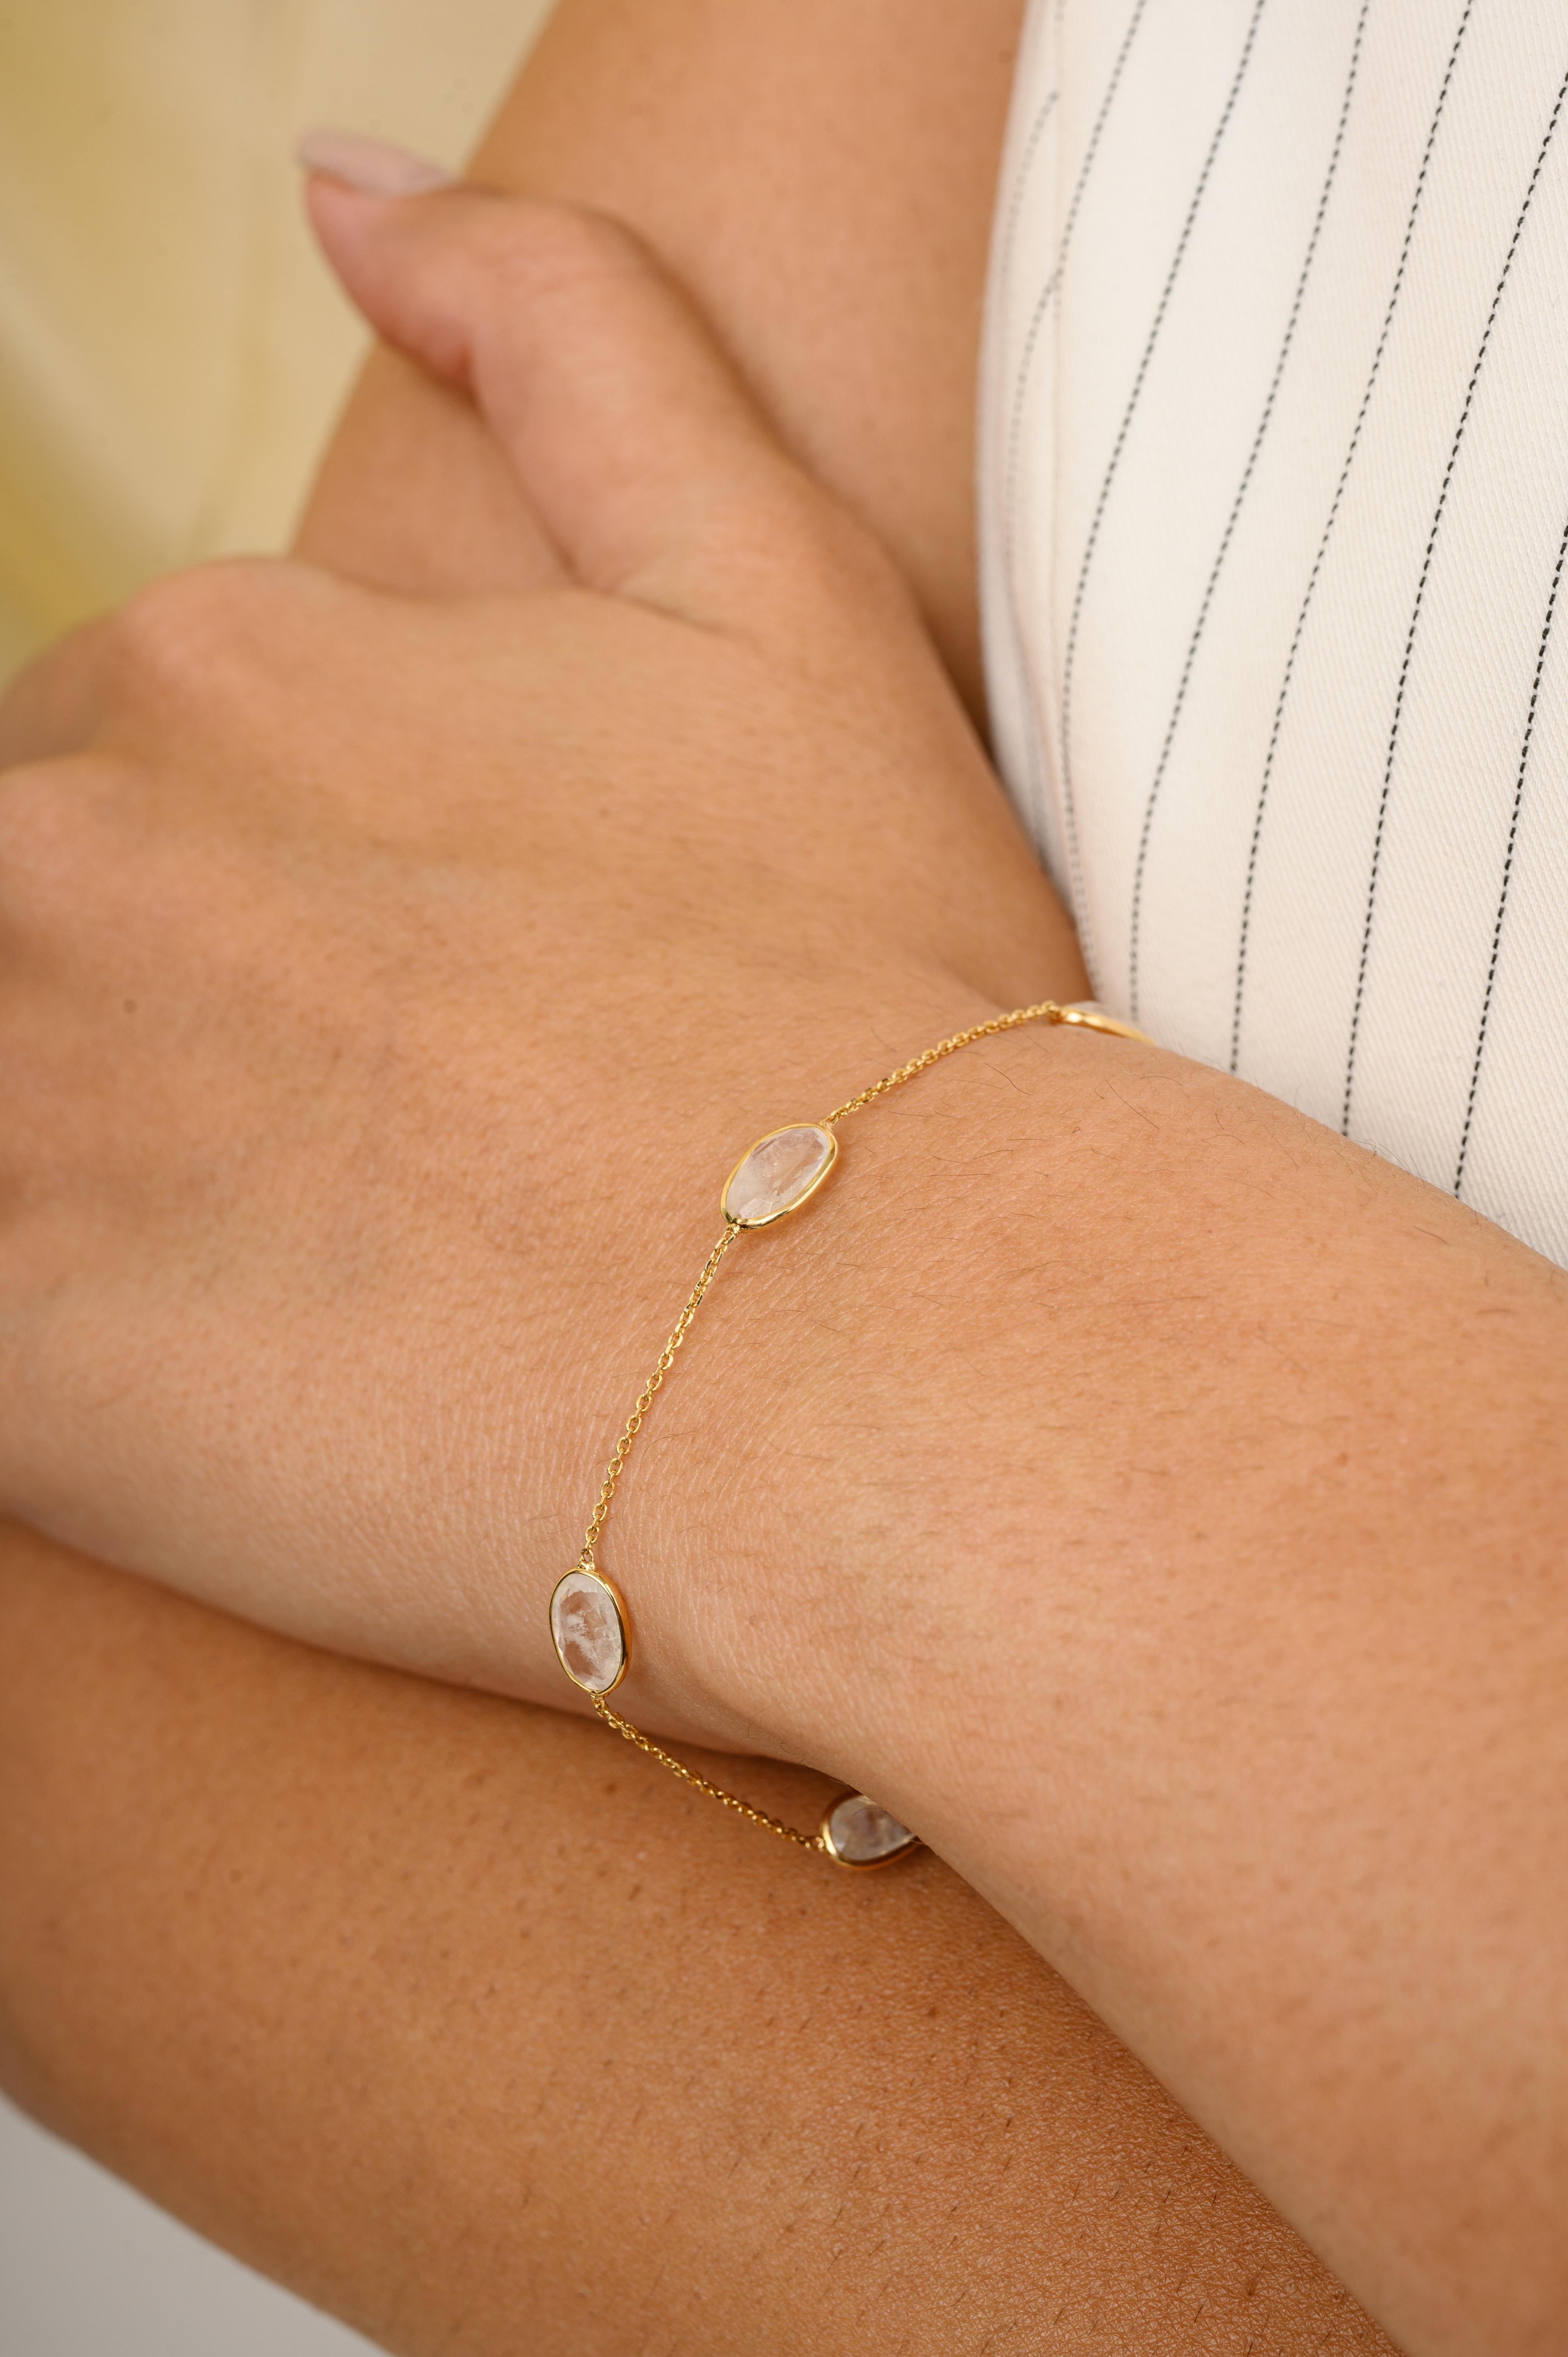 This Minimal June Birthstone Moonstone Chain Bracelet in 18K gold showcases 0.59 carats endlessly sparkling natural rainbow moonstone. It measures 7 inches long in length. 
Rainbow moonstone can help you attract the right people into your life if